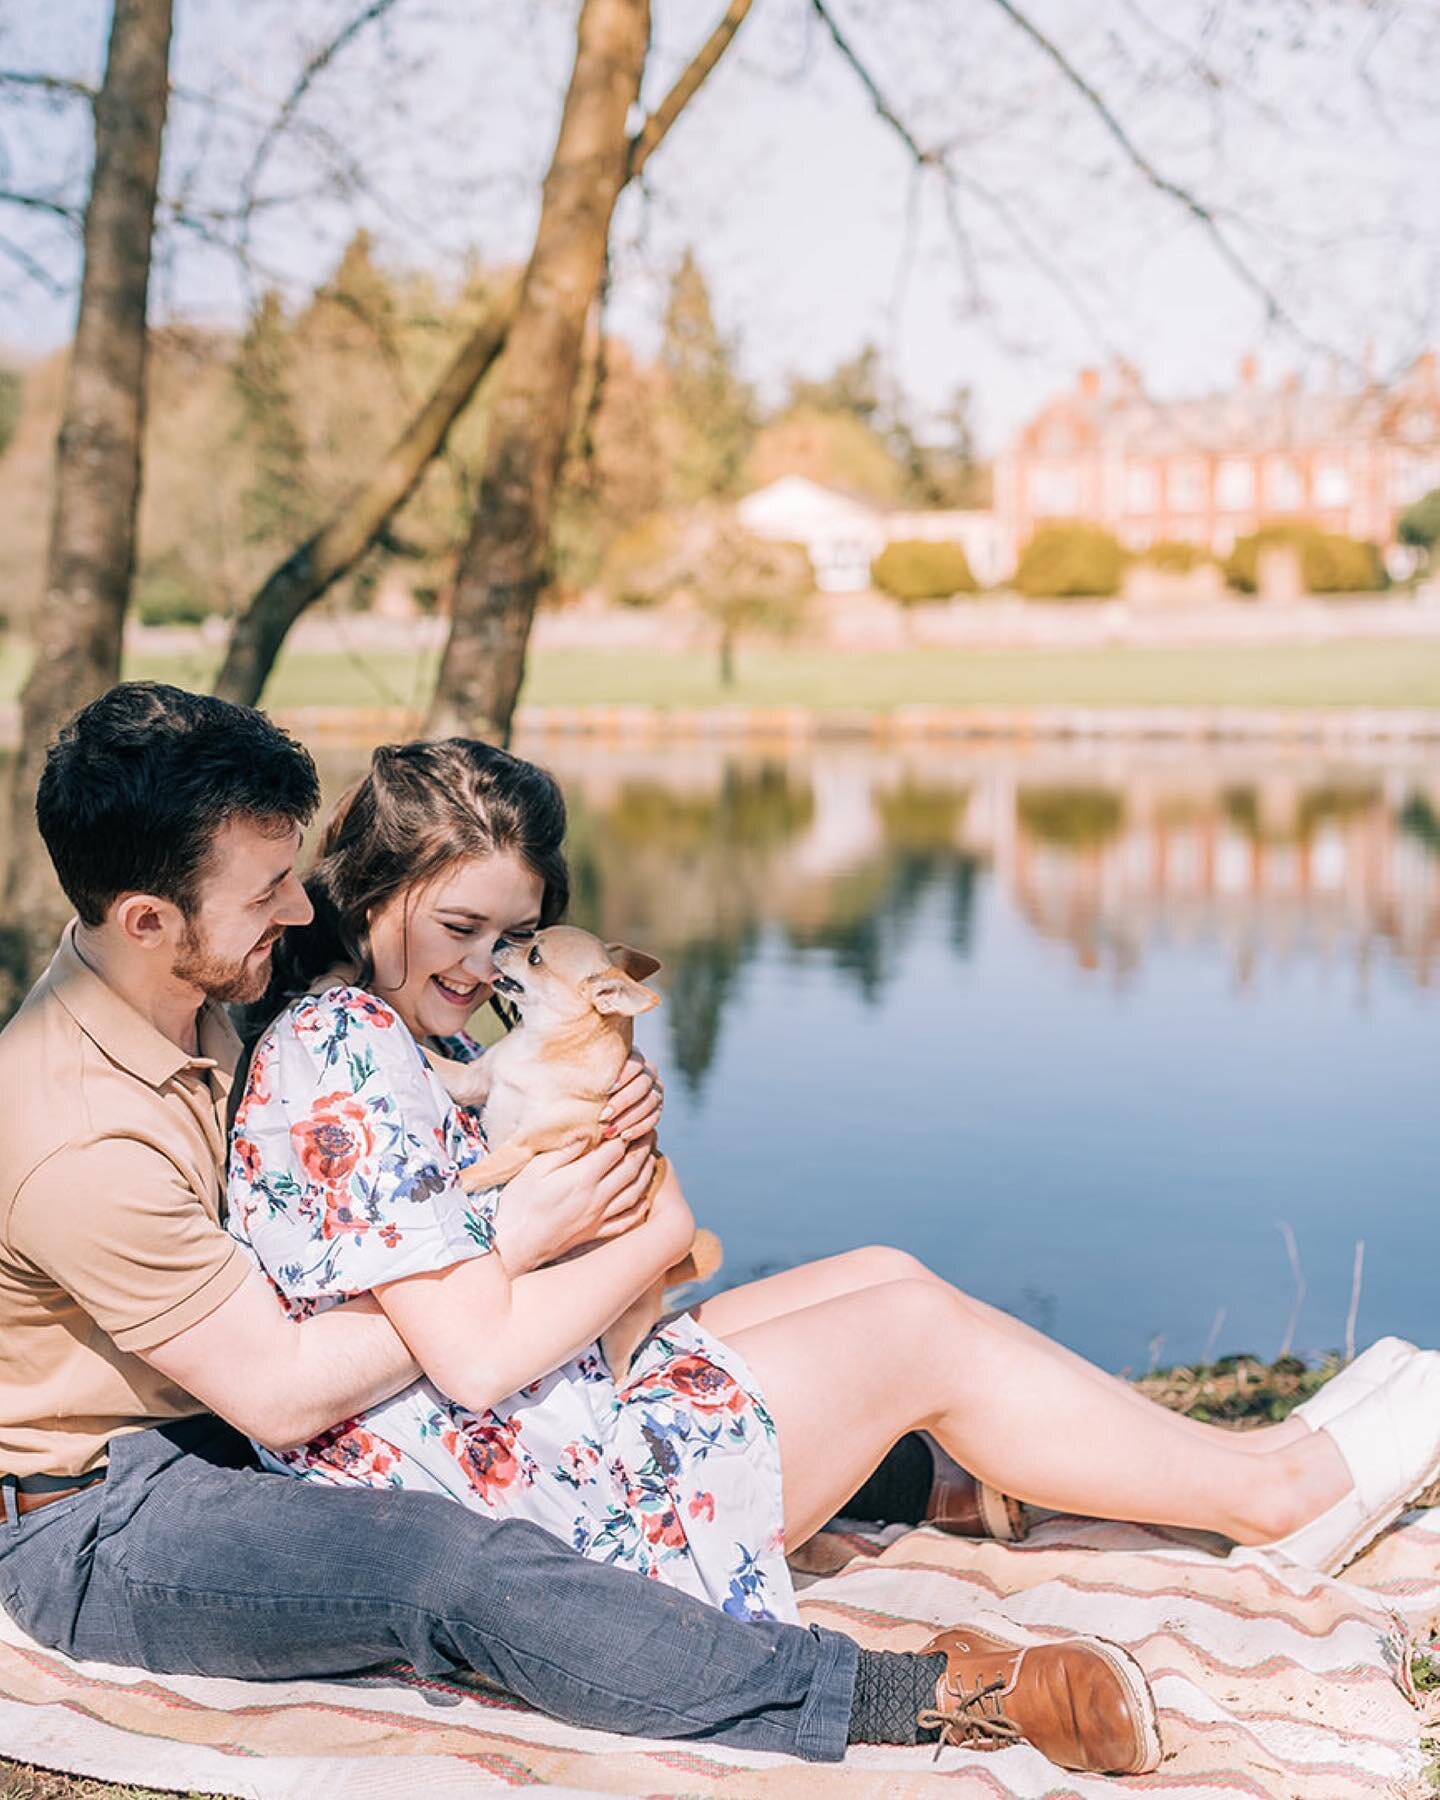 Pretty Spring Vibes 🌼 
.
Catching up on sharing my most recent shoots, I met with Karen + Jacob to photograph their pre wedding shoot, they introduced me to the prettiest location and their little Lula - who I just fell in love with! They are the sw